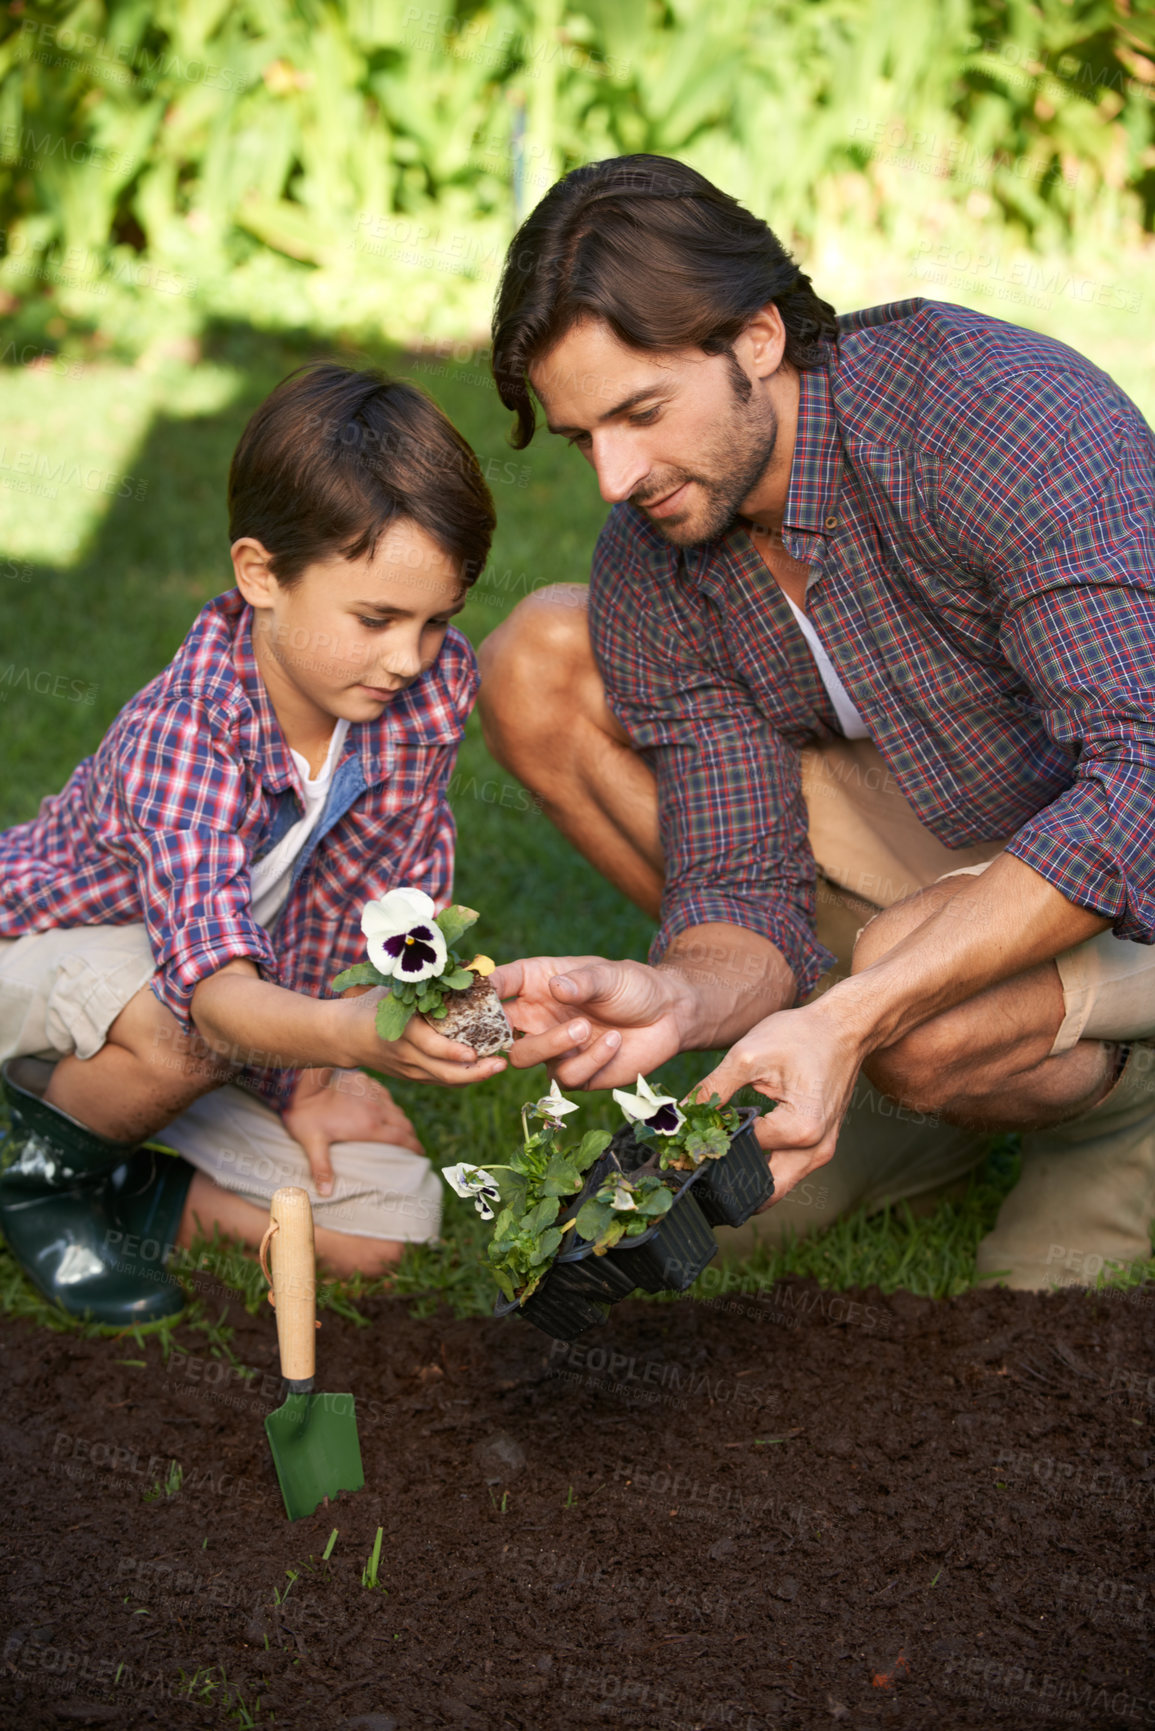 Buy stock photo Dad, son and garden in backyard by soil to plant flowers, teach and show to implant in dirt for floral bed. Parent, kid and lawn in yard by nature to bond in sun, together and learn gardening